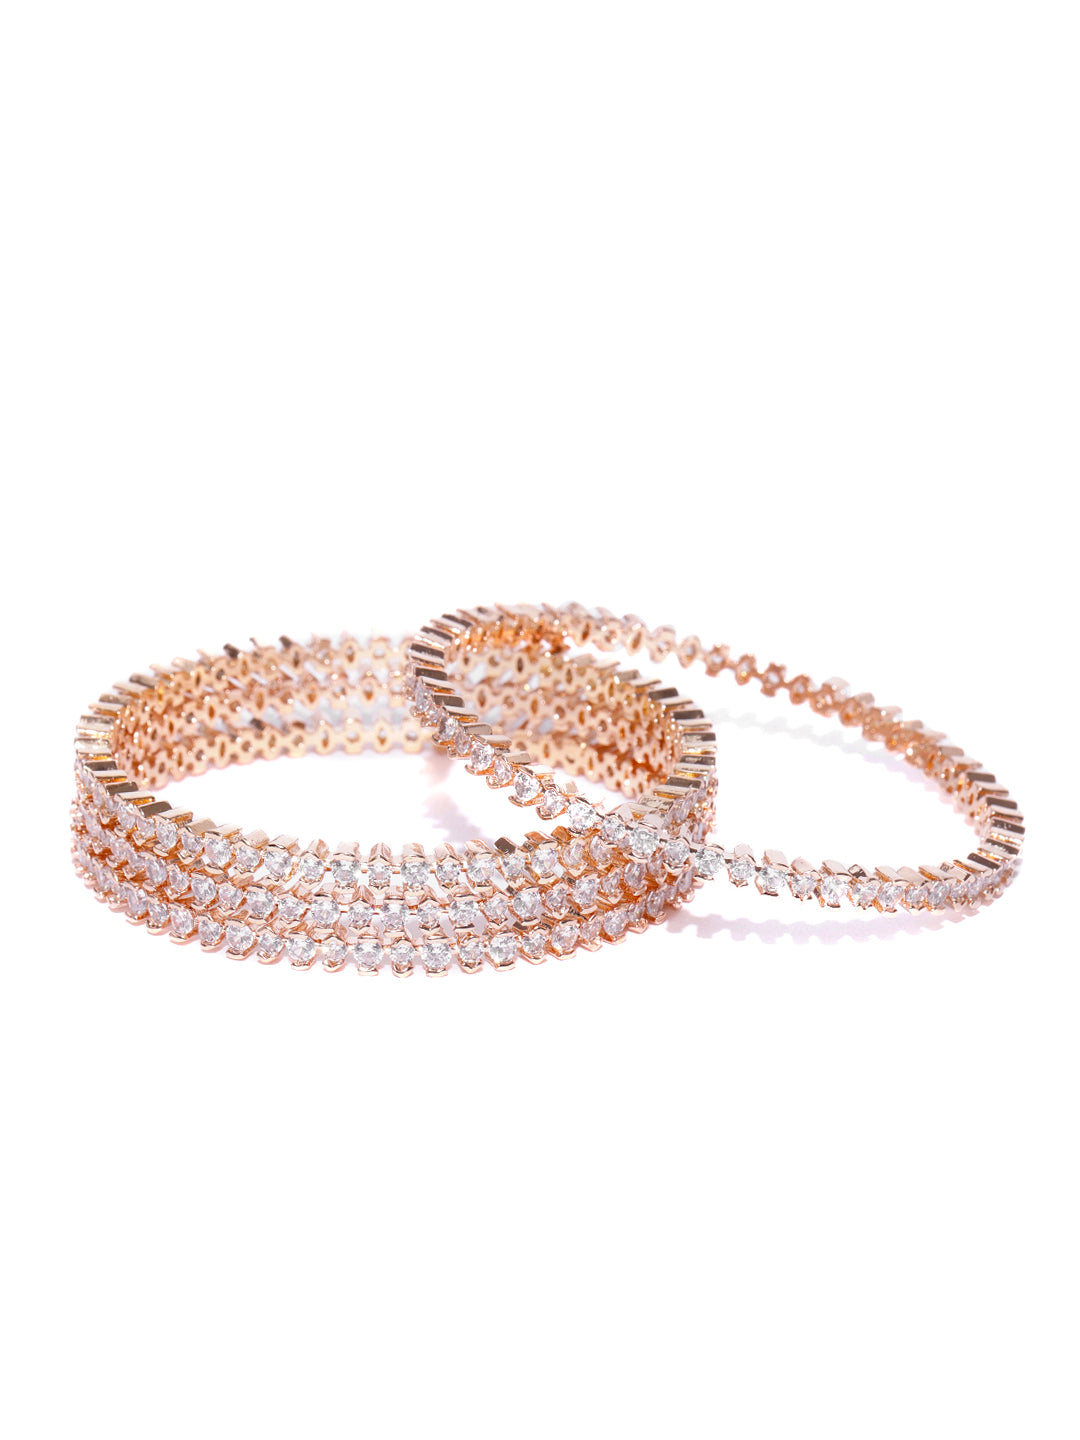 Buy Chunky Curb Chain Bracelet Rose Gold Trendy Statement Online in India   Etsy